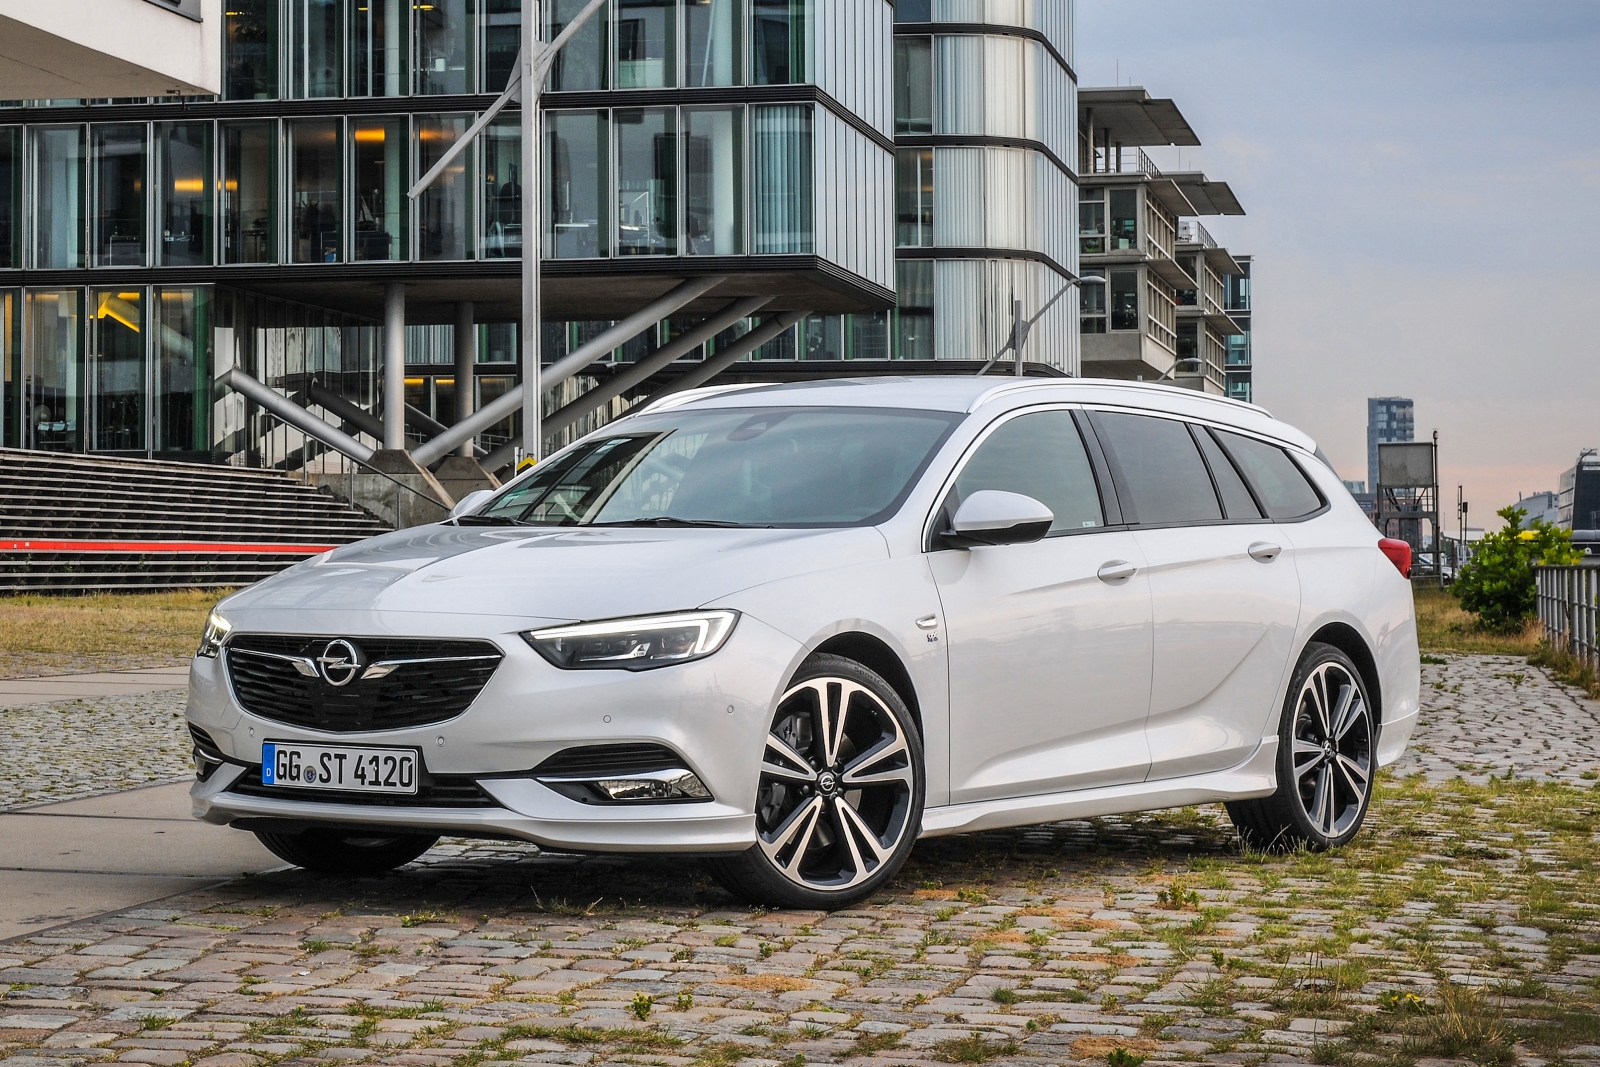 New top-of-the-line engine for Opel Insignia